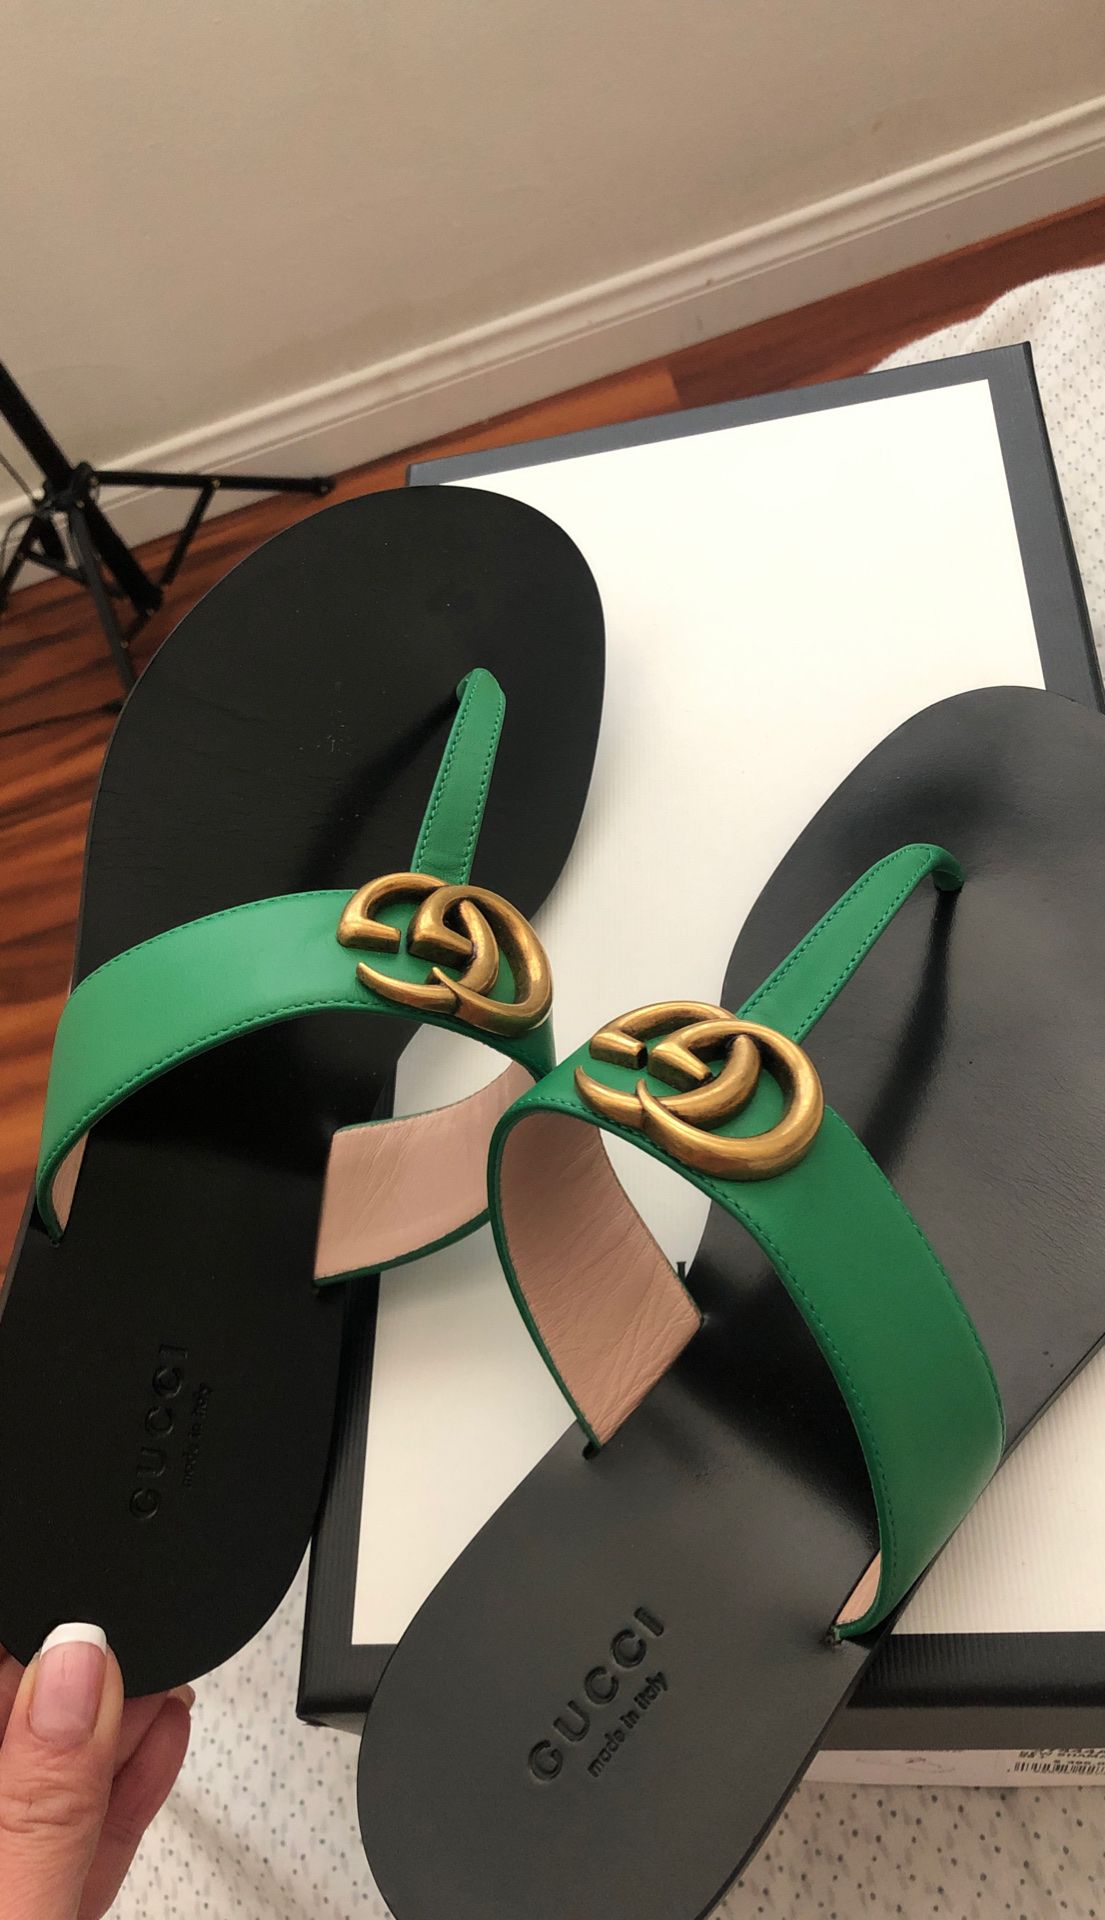 Gucci Flat Marmont Leather Thong